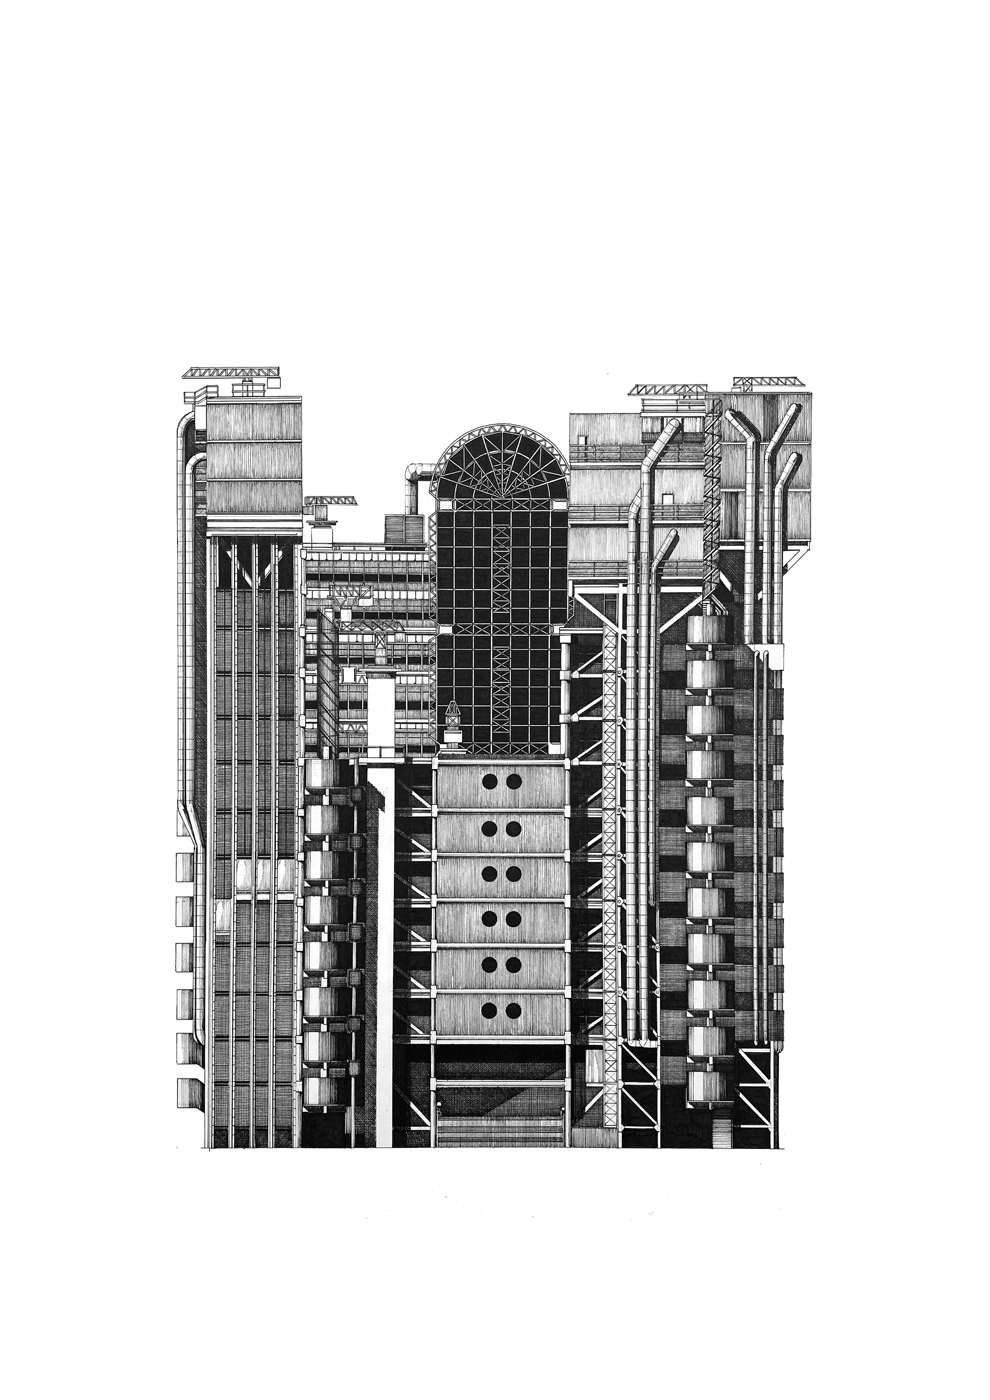 Nick Coupland, Intricate detailed historic architecture illustration of Lloyds building. Pen and ink, striking, bold images.